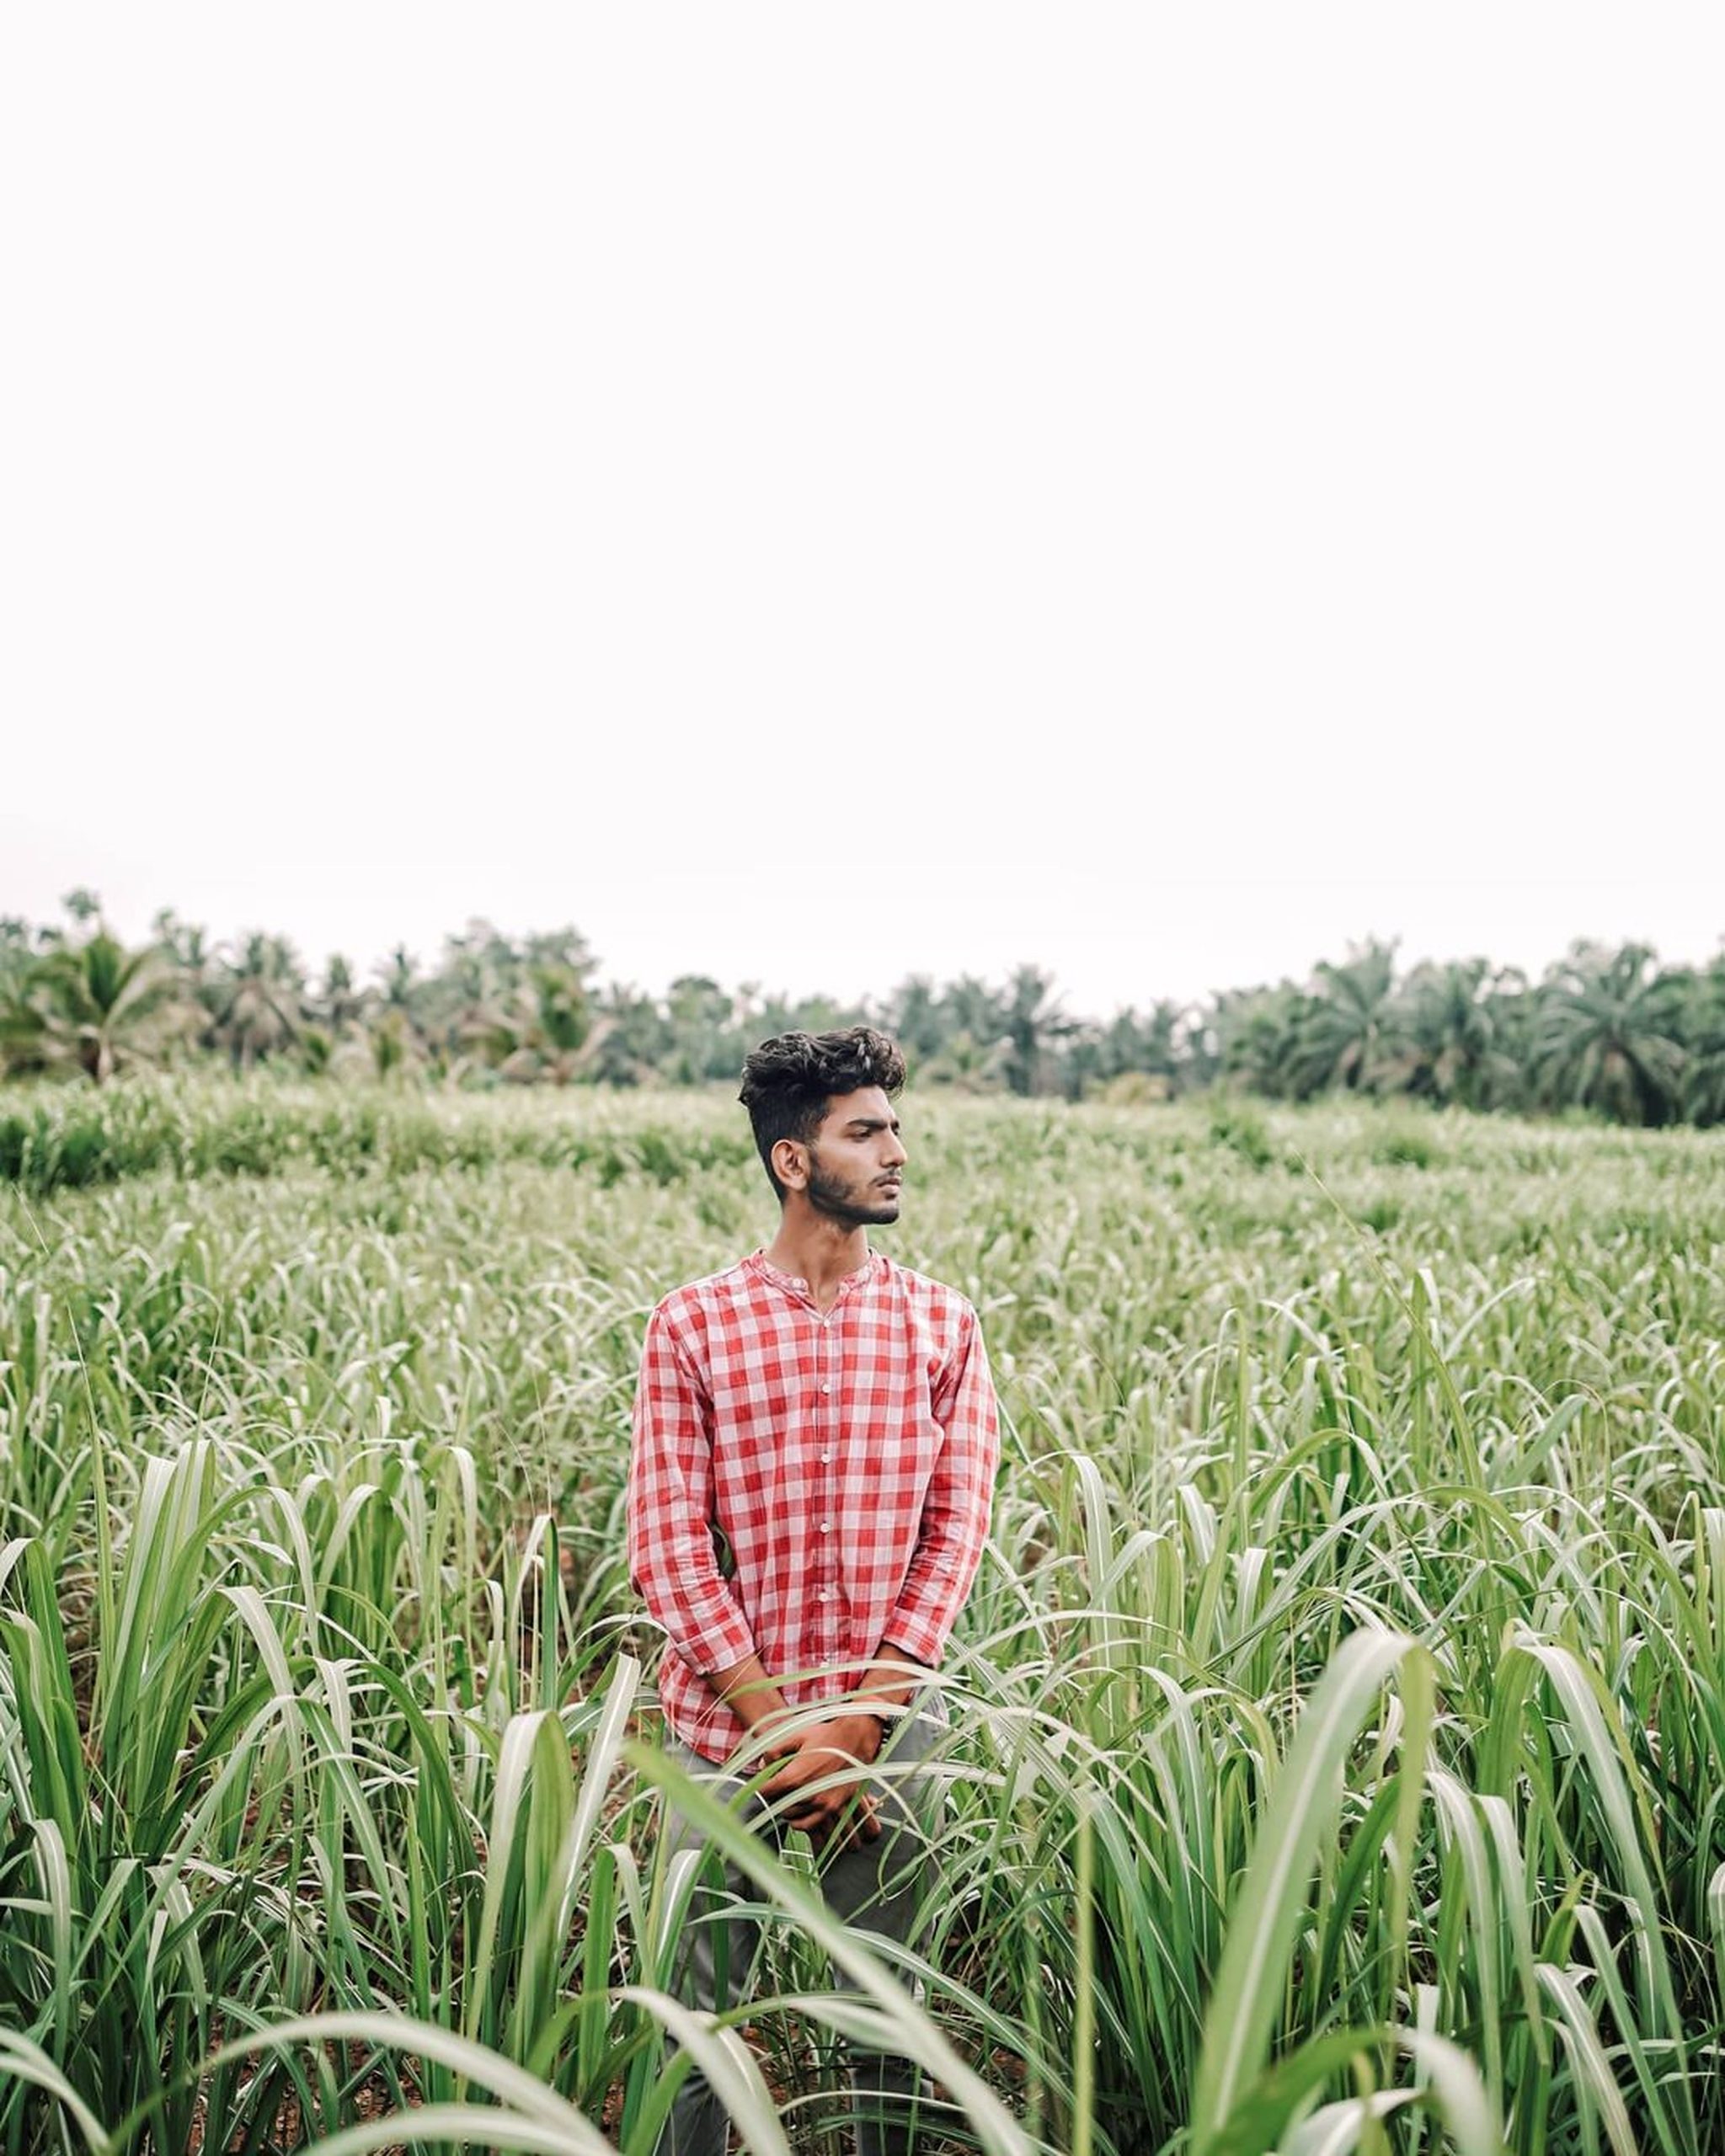 Boy standing in the crop farm and posing